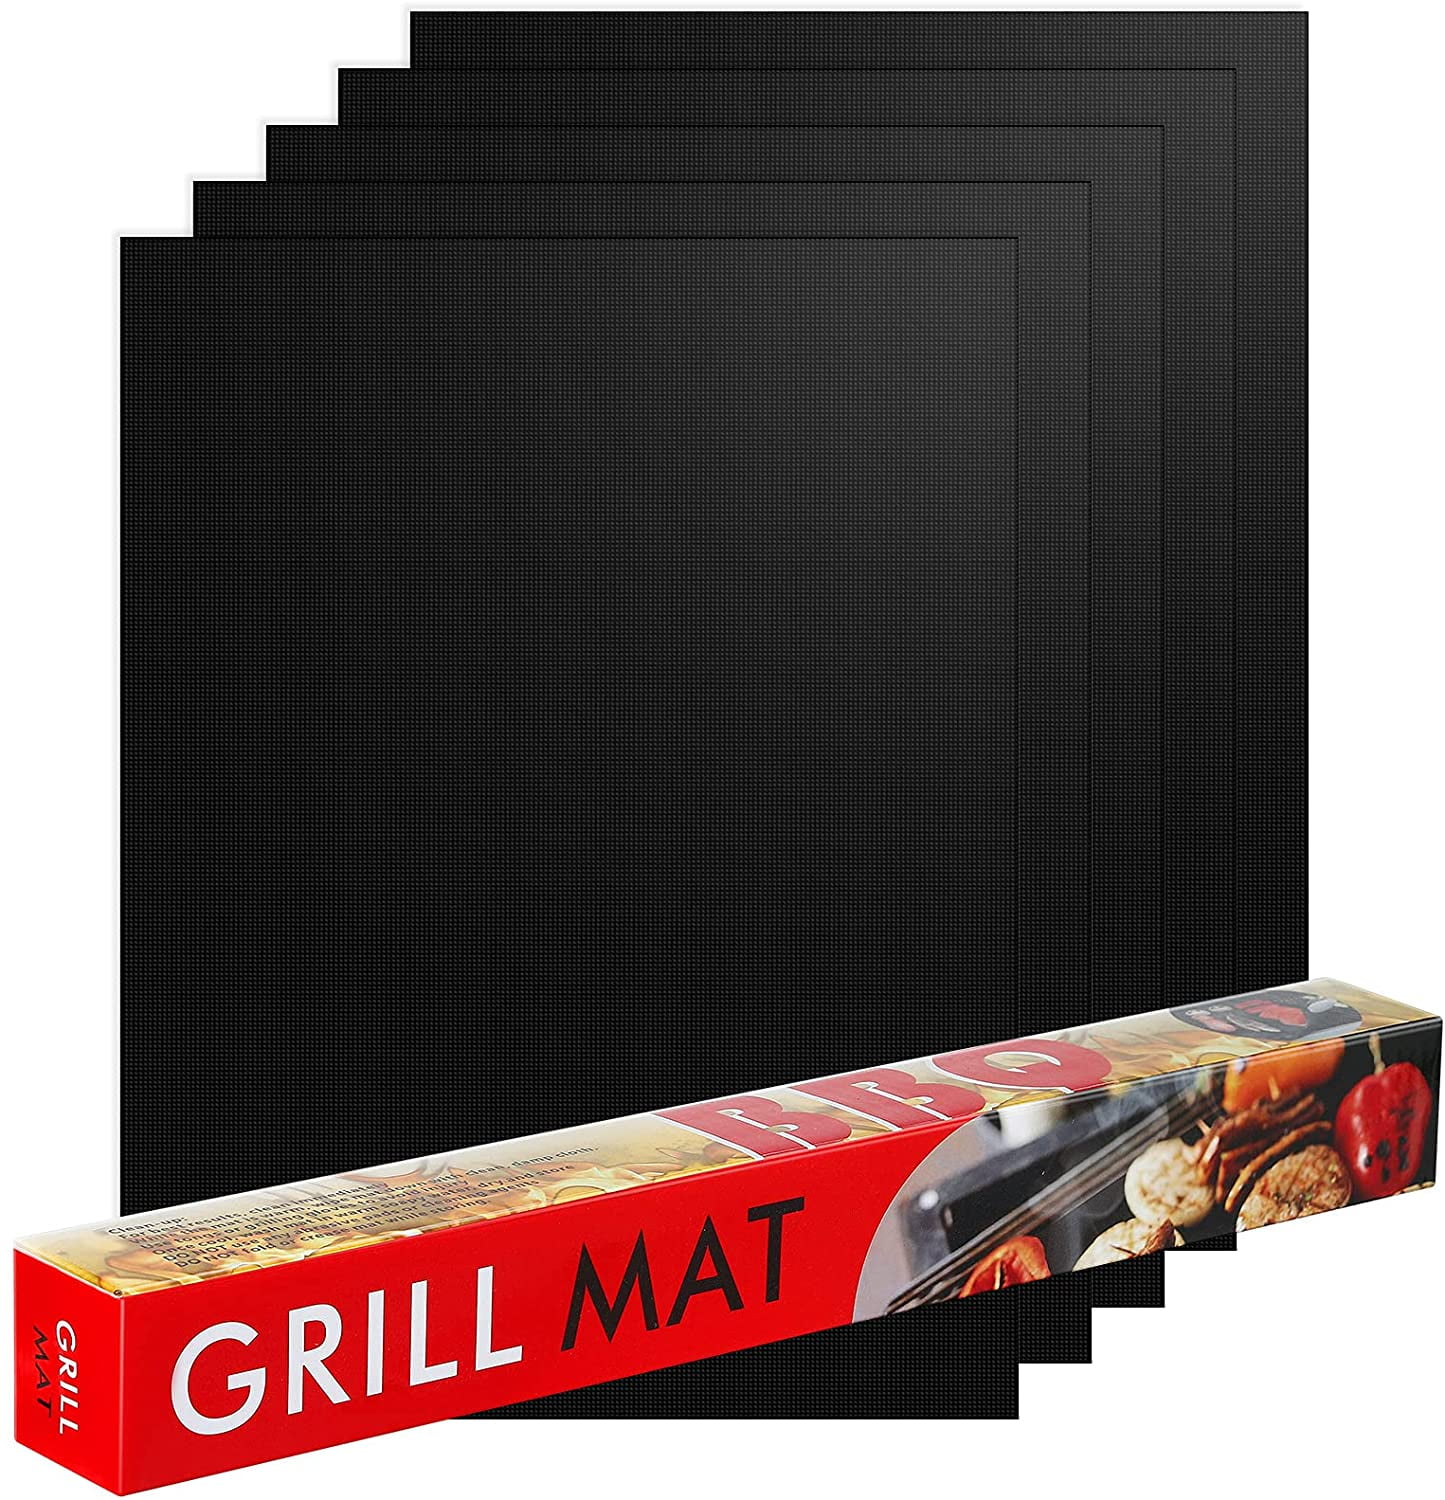 Black JUCT BBQ Grill Mesh Mat-Set of 5 Non-Stick Reusable,15.75x13 Inch Black BBQ Grill Mat Heat Resistant-Easy to Clean PTFE coated fiberglass FDA Approved-Suitable for Outdoor Grills and Oven 